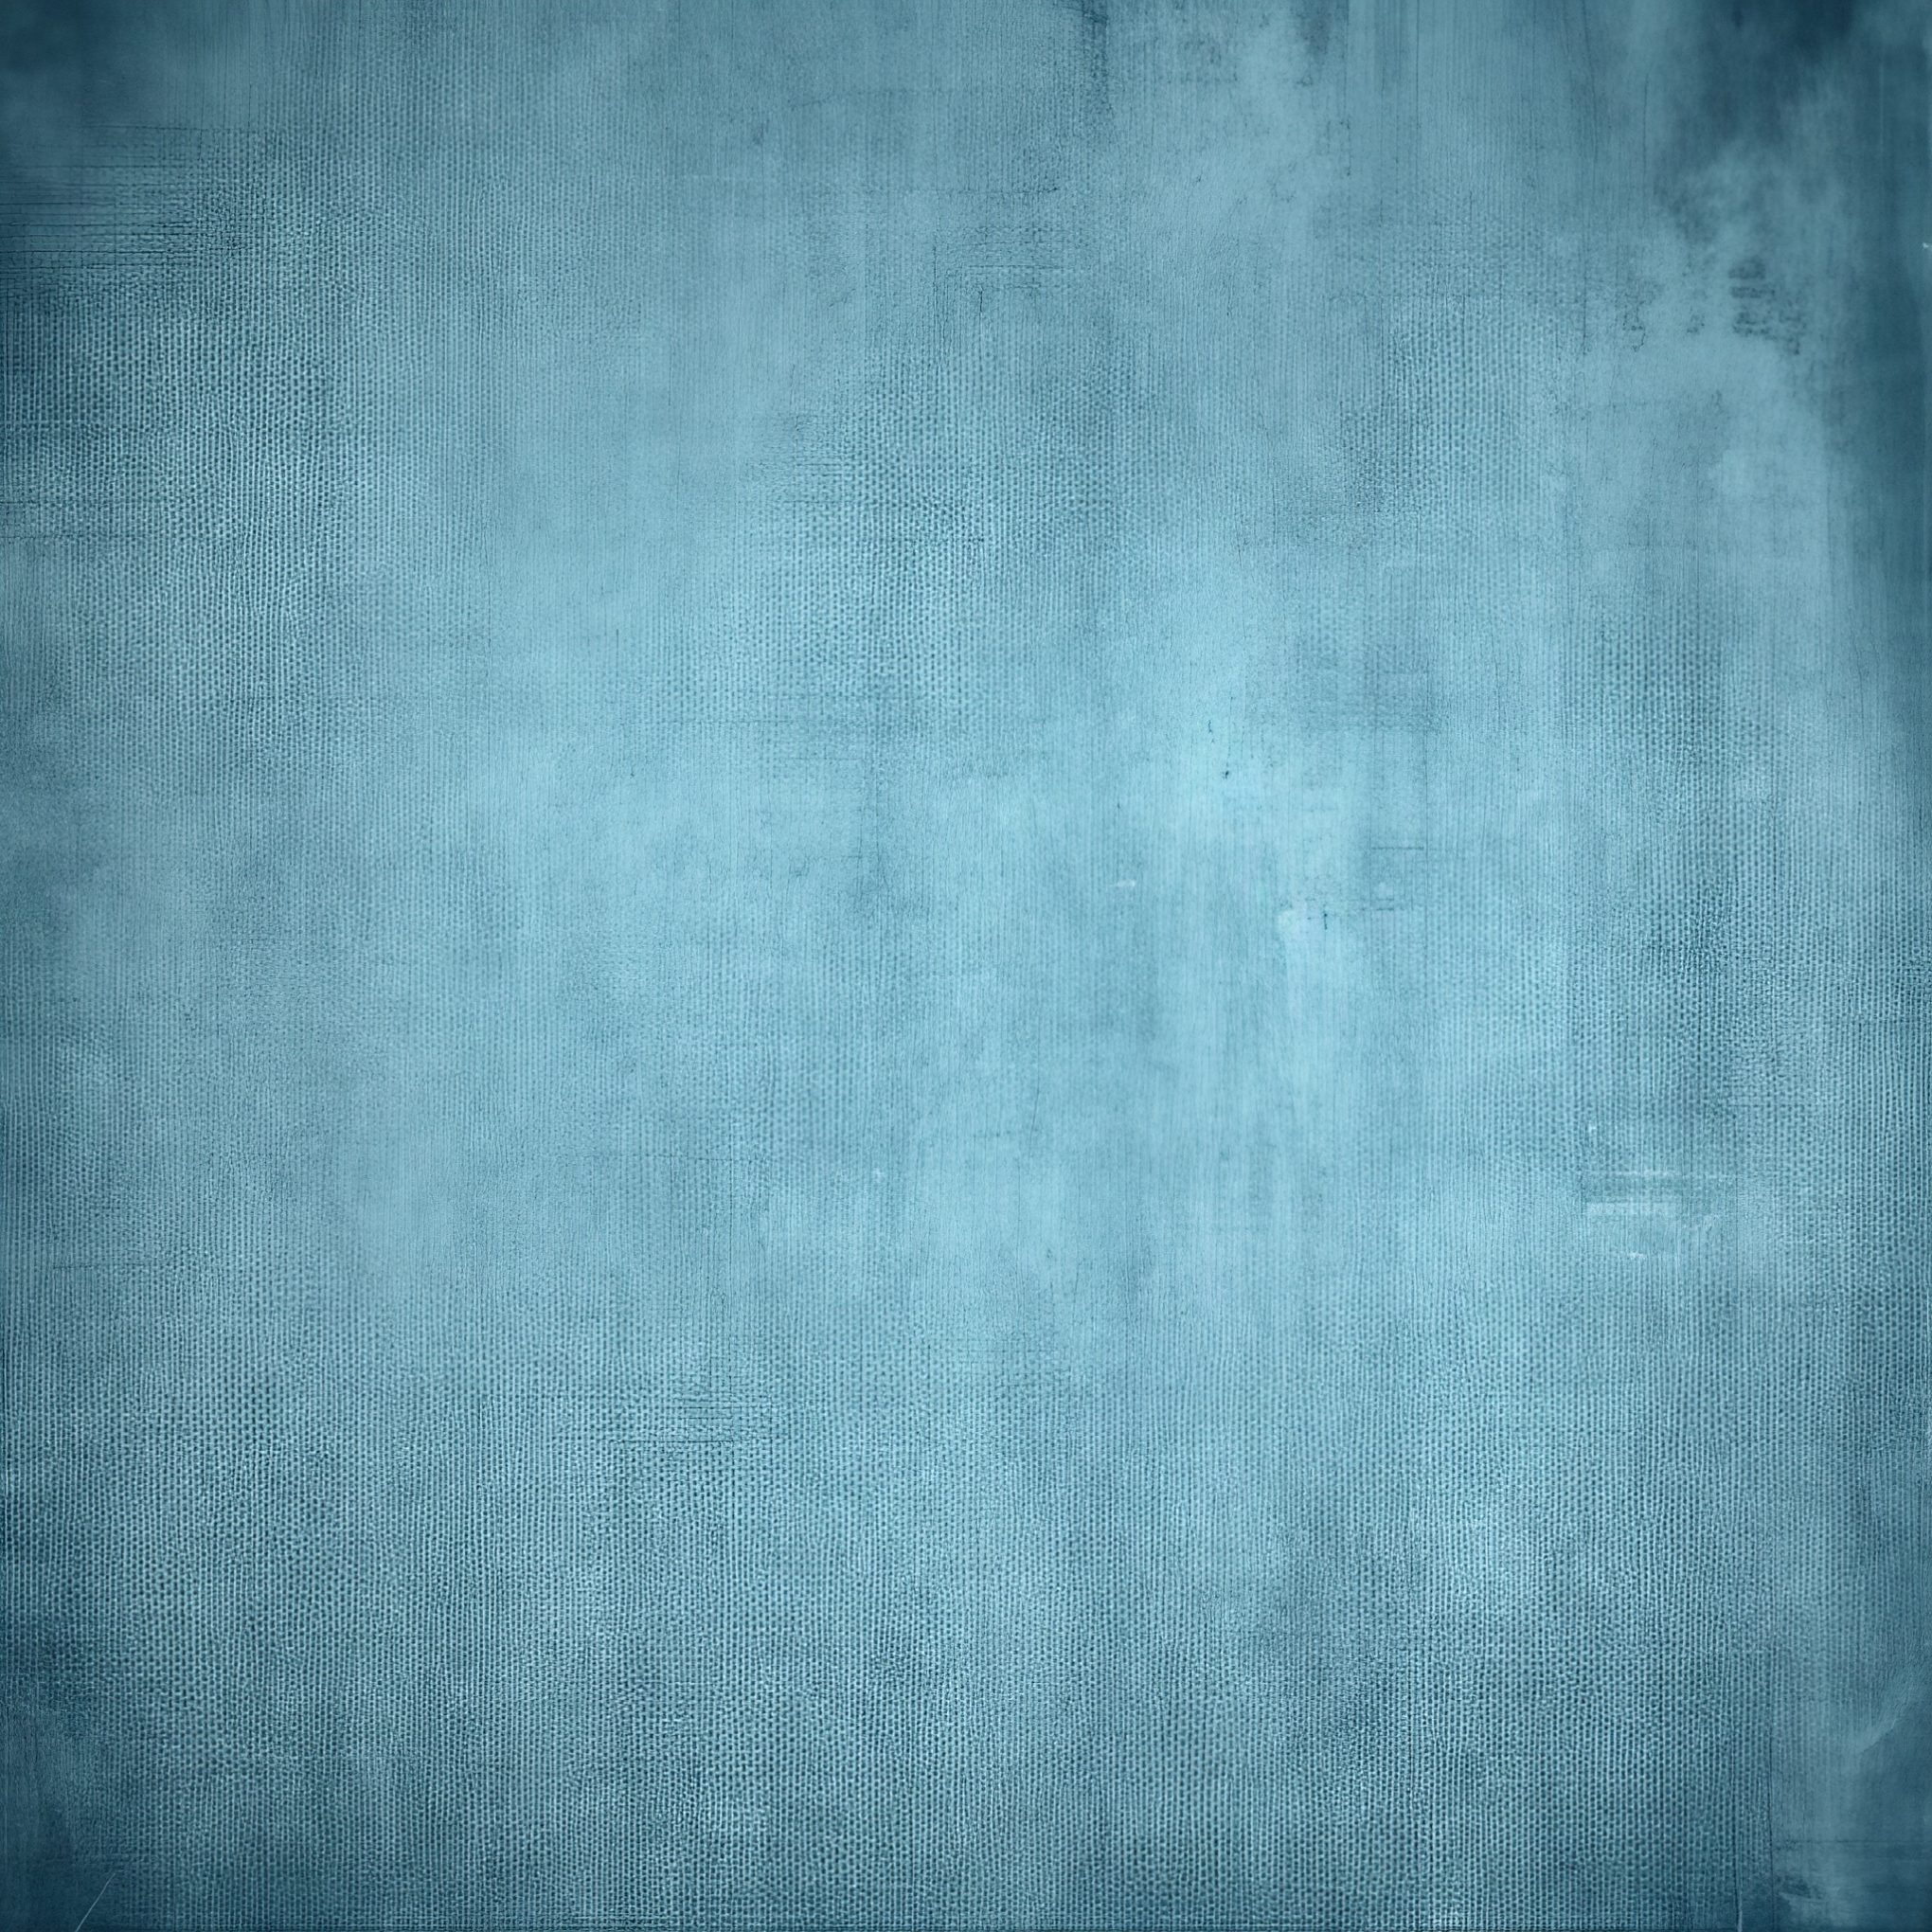 Free Picture Download Blue Grunge Material Textured Background